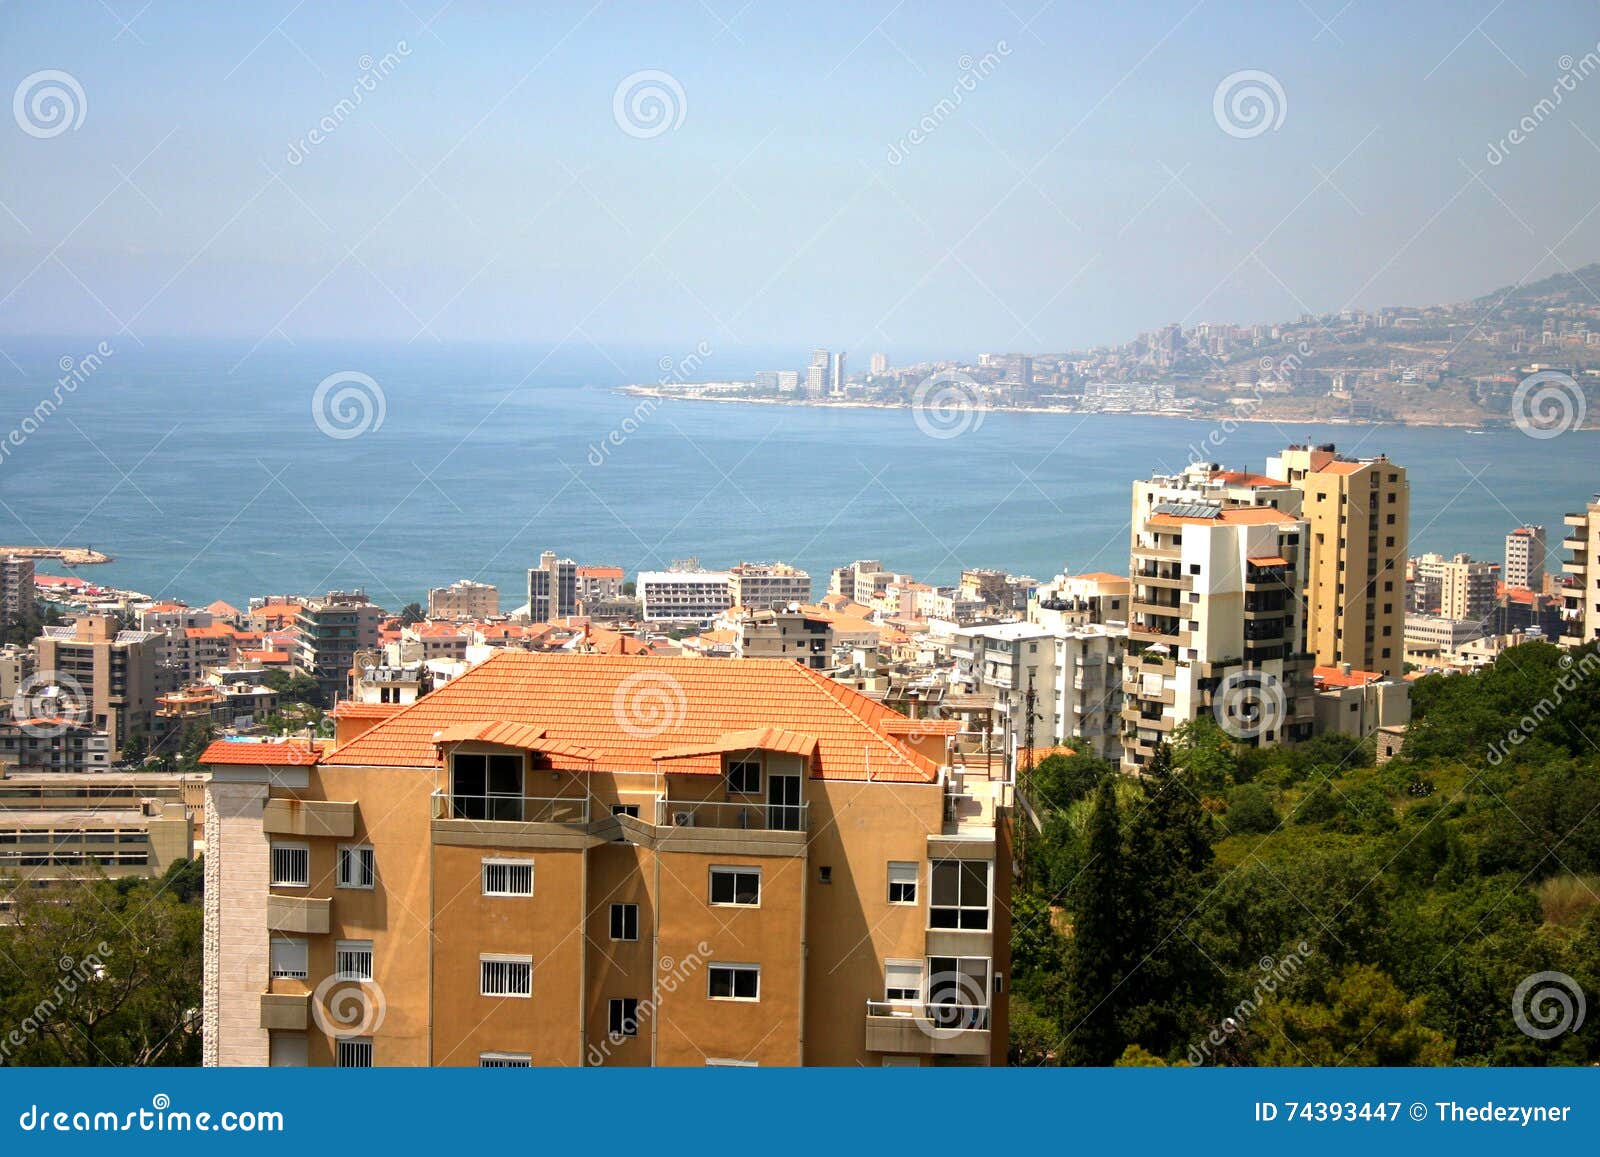 cityscape of jounieh bay